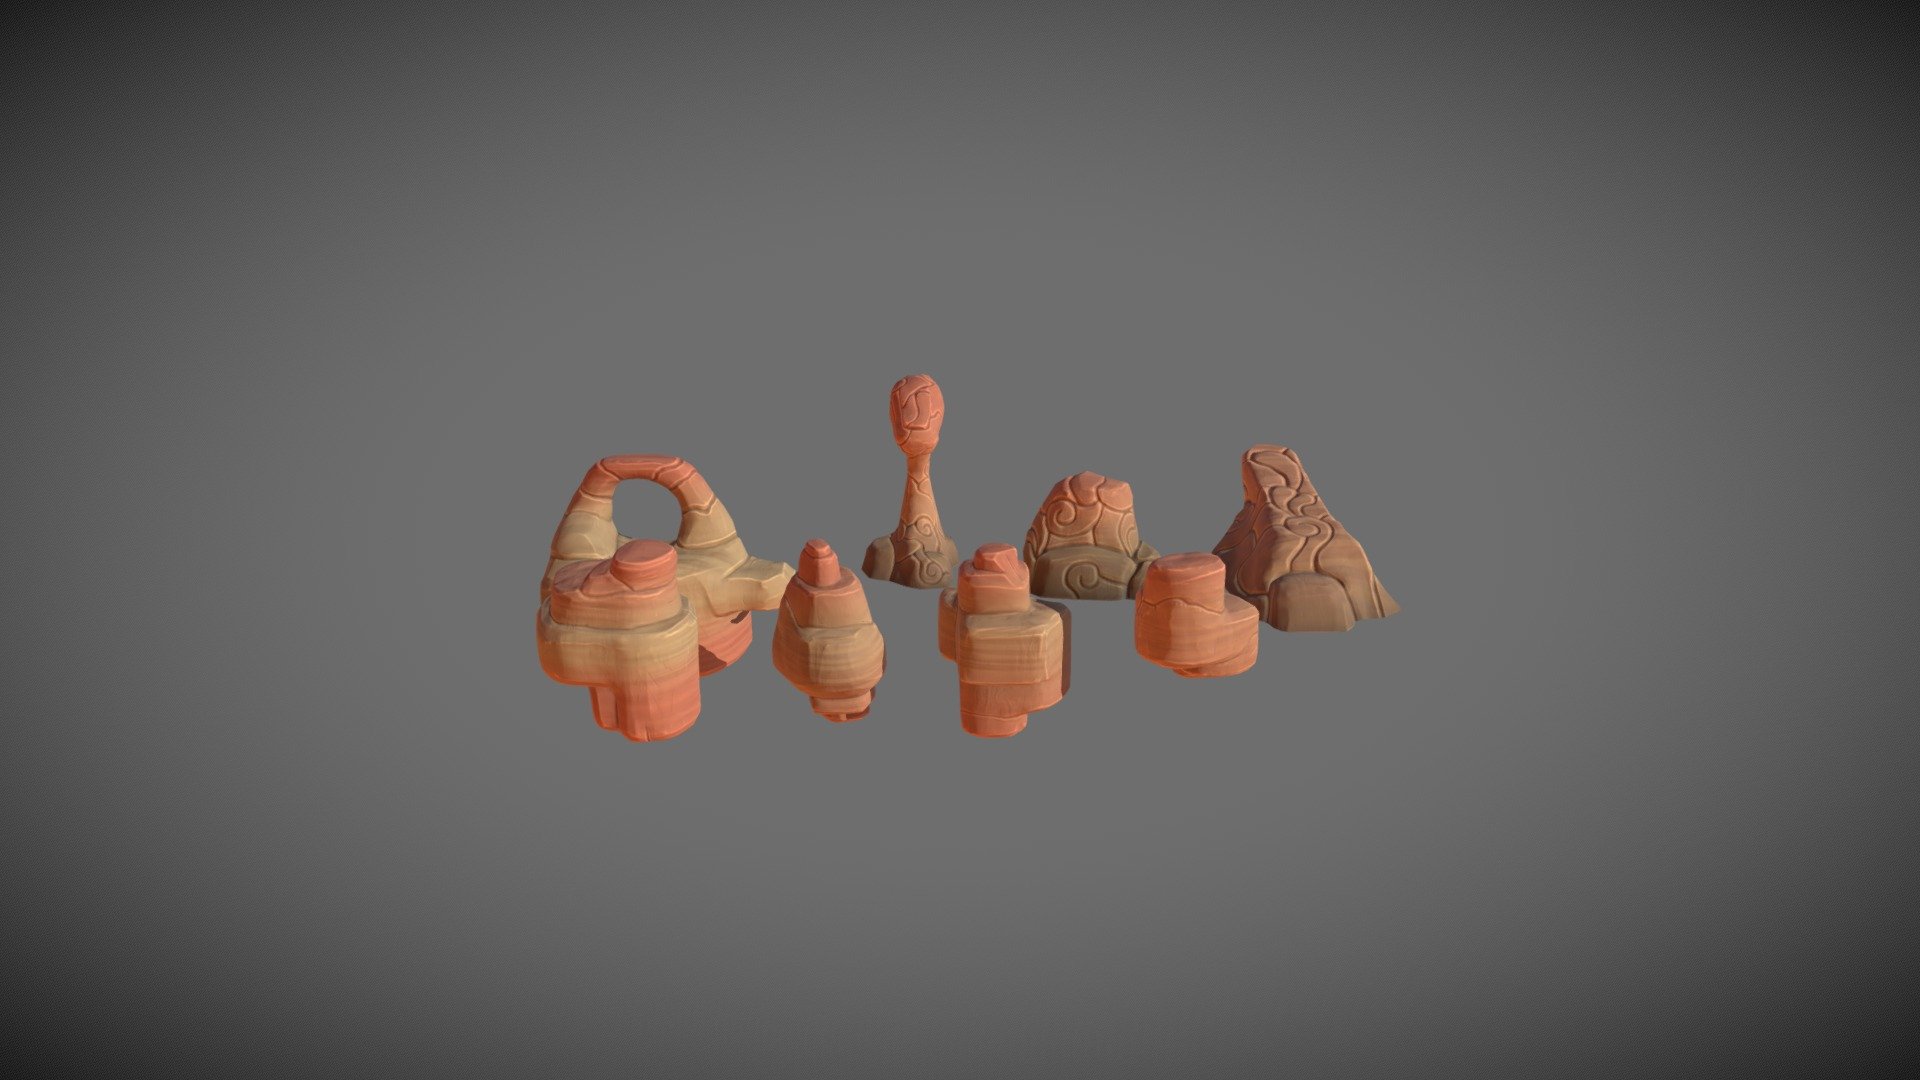 A pack of 8 desertic rock with 5 reversible rock
This pack also contain the HD sculpt and the LD model for the baking. 
The textures are exported in 4096x4096 in classic format and Mask Map Format for unity 

Mask map use Albedo map, Normal Map and a &ldquo;MaskMap